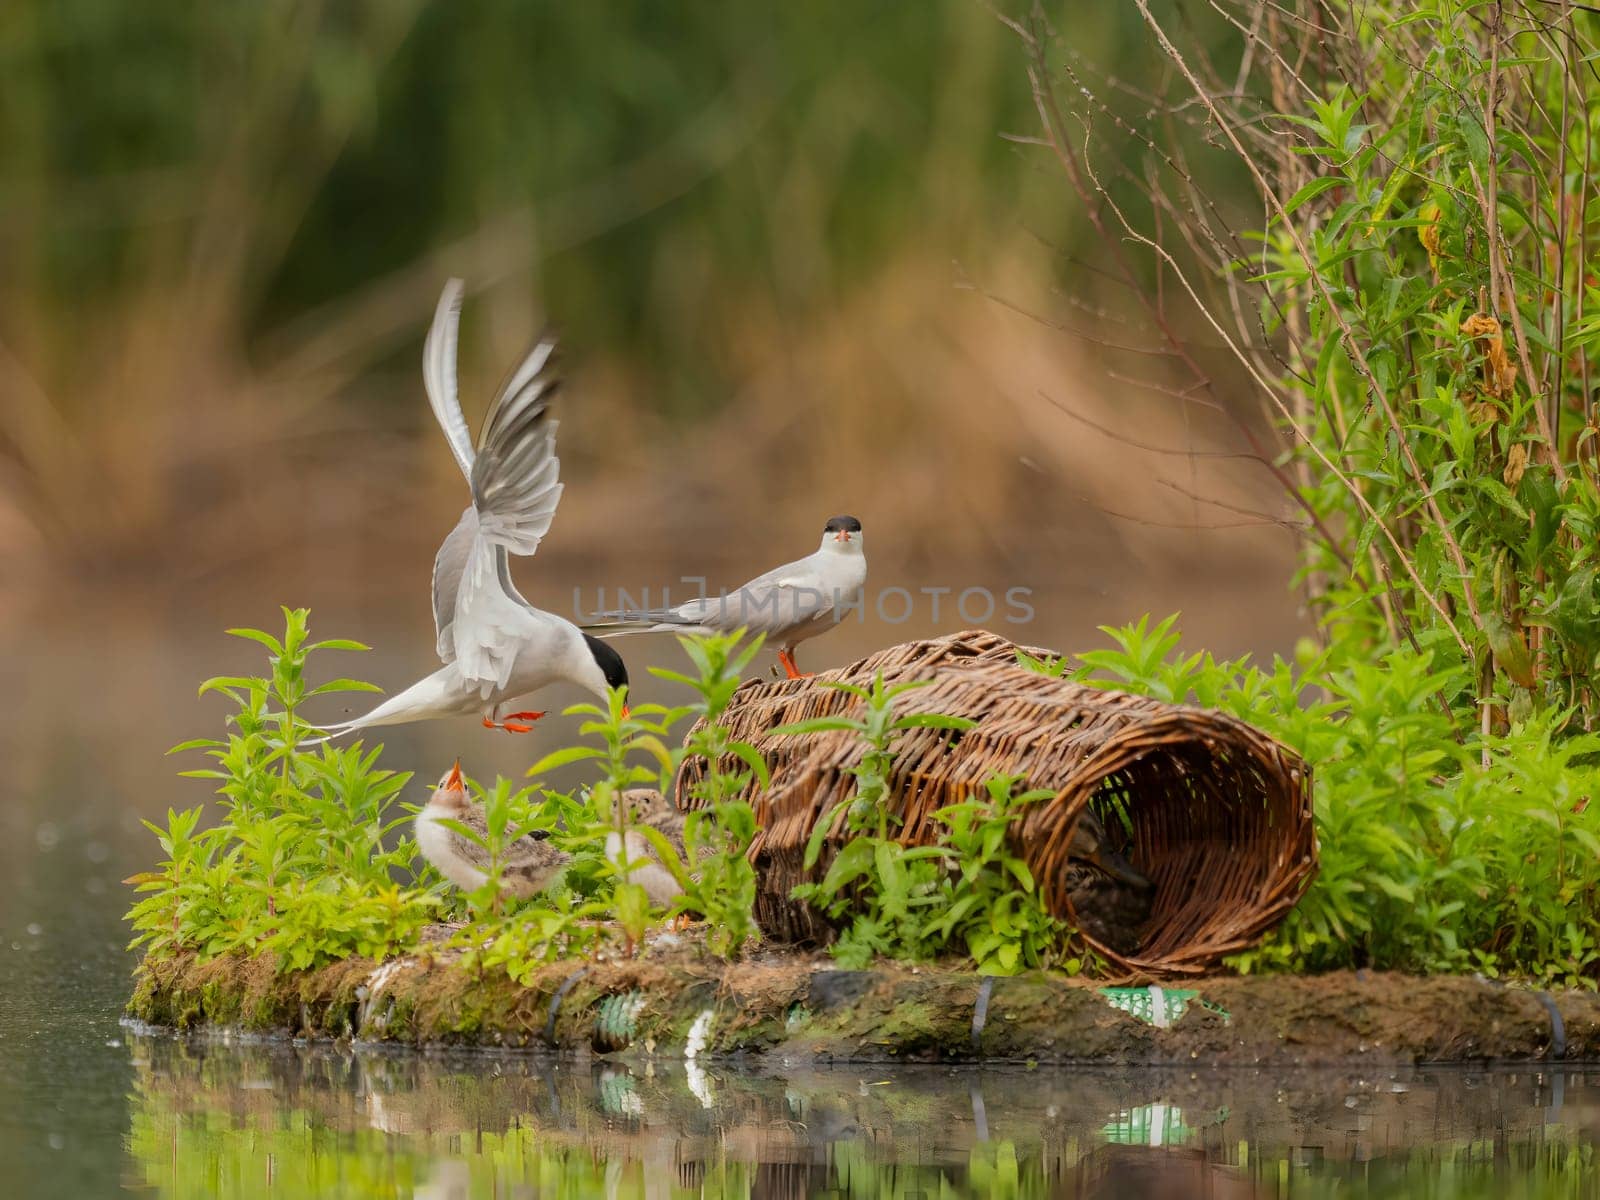 Common Terns nurturing their young on the breeding ground, a beautiful scene of parental care and protection.